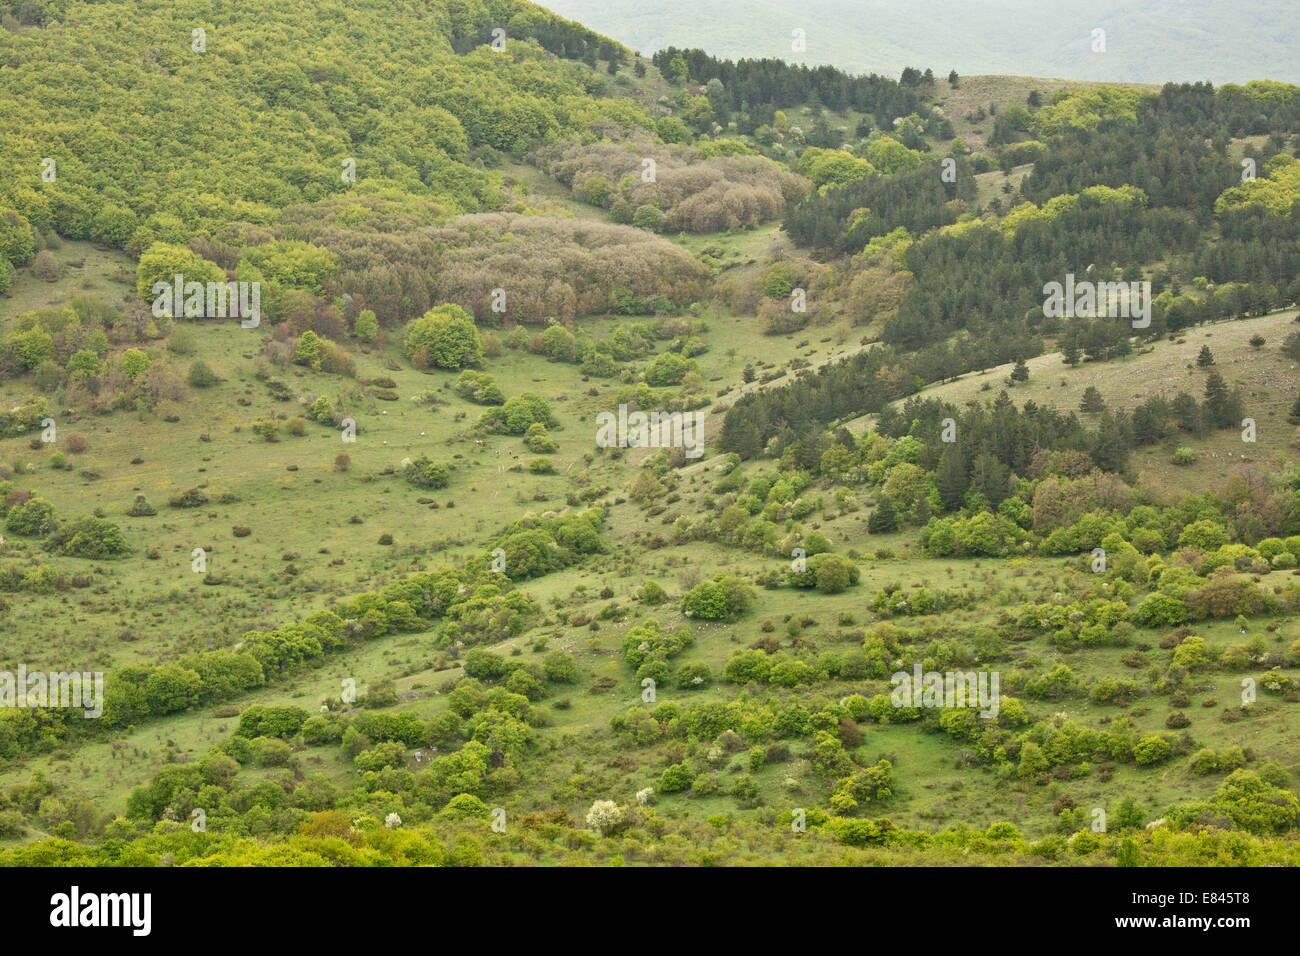 Prime Marsican Brown Bear habitat, below the bear-watching point at Gioia Vecchio, Abruzzo National Park, Italy. Stock Photo